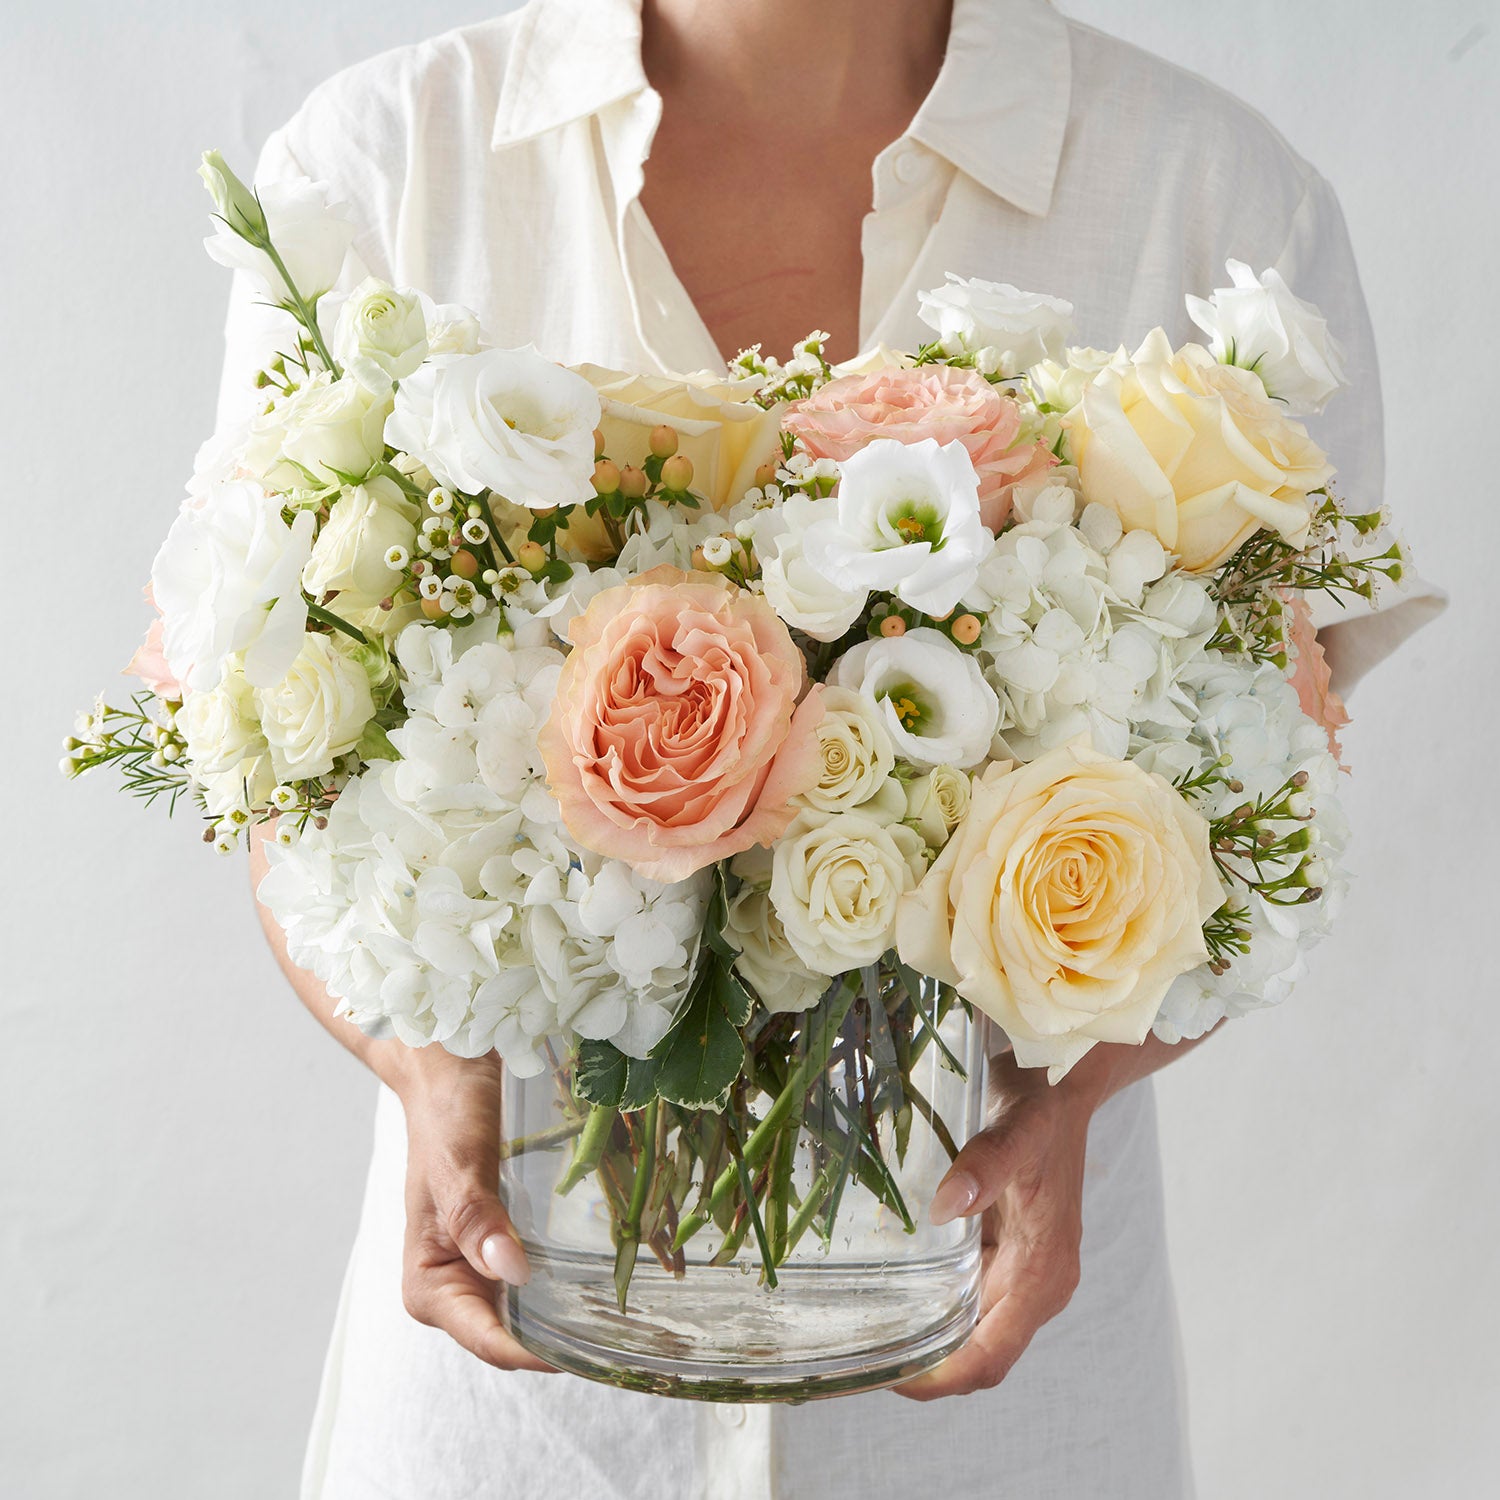 woman wearing all whit holding large clear glass vase filled with peach and cream roses,  white hydrangea and white lisianthus